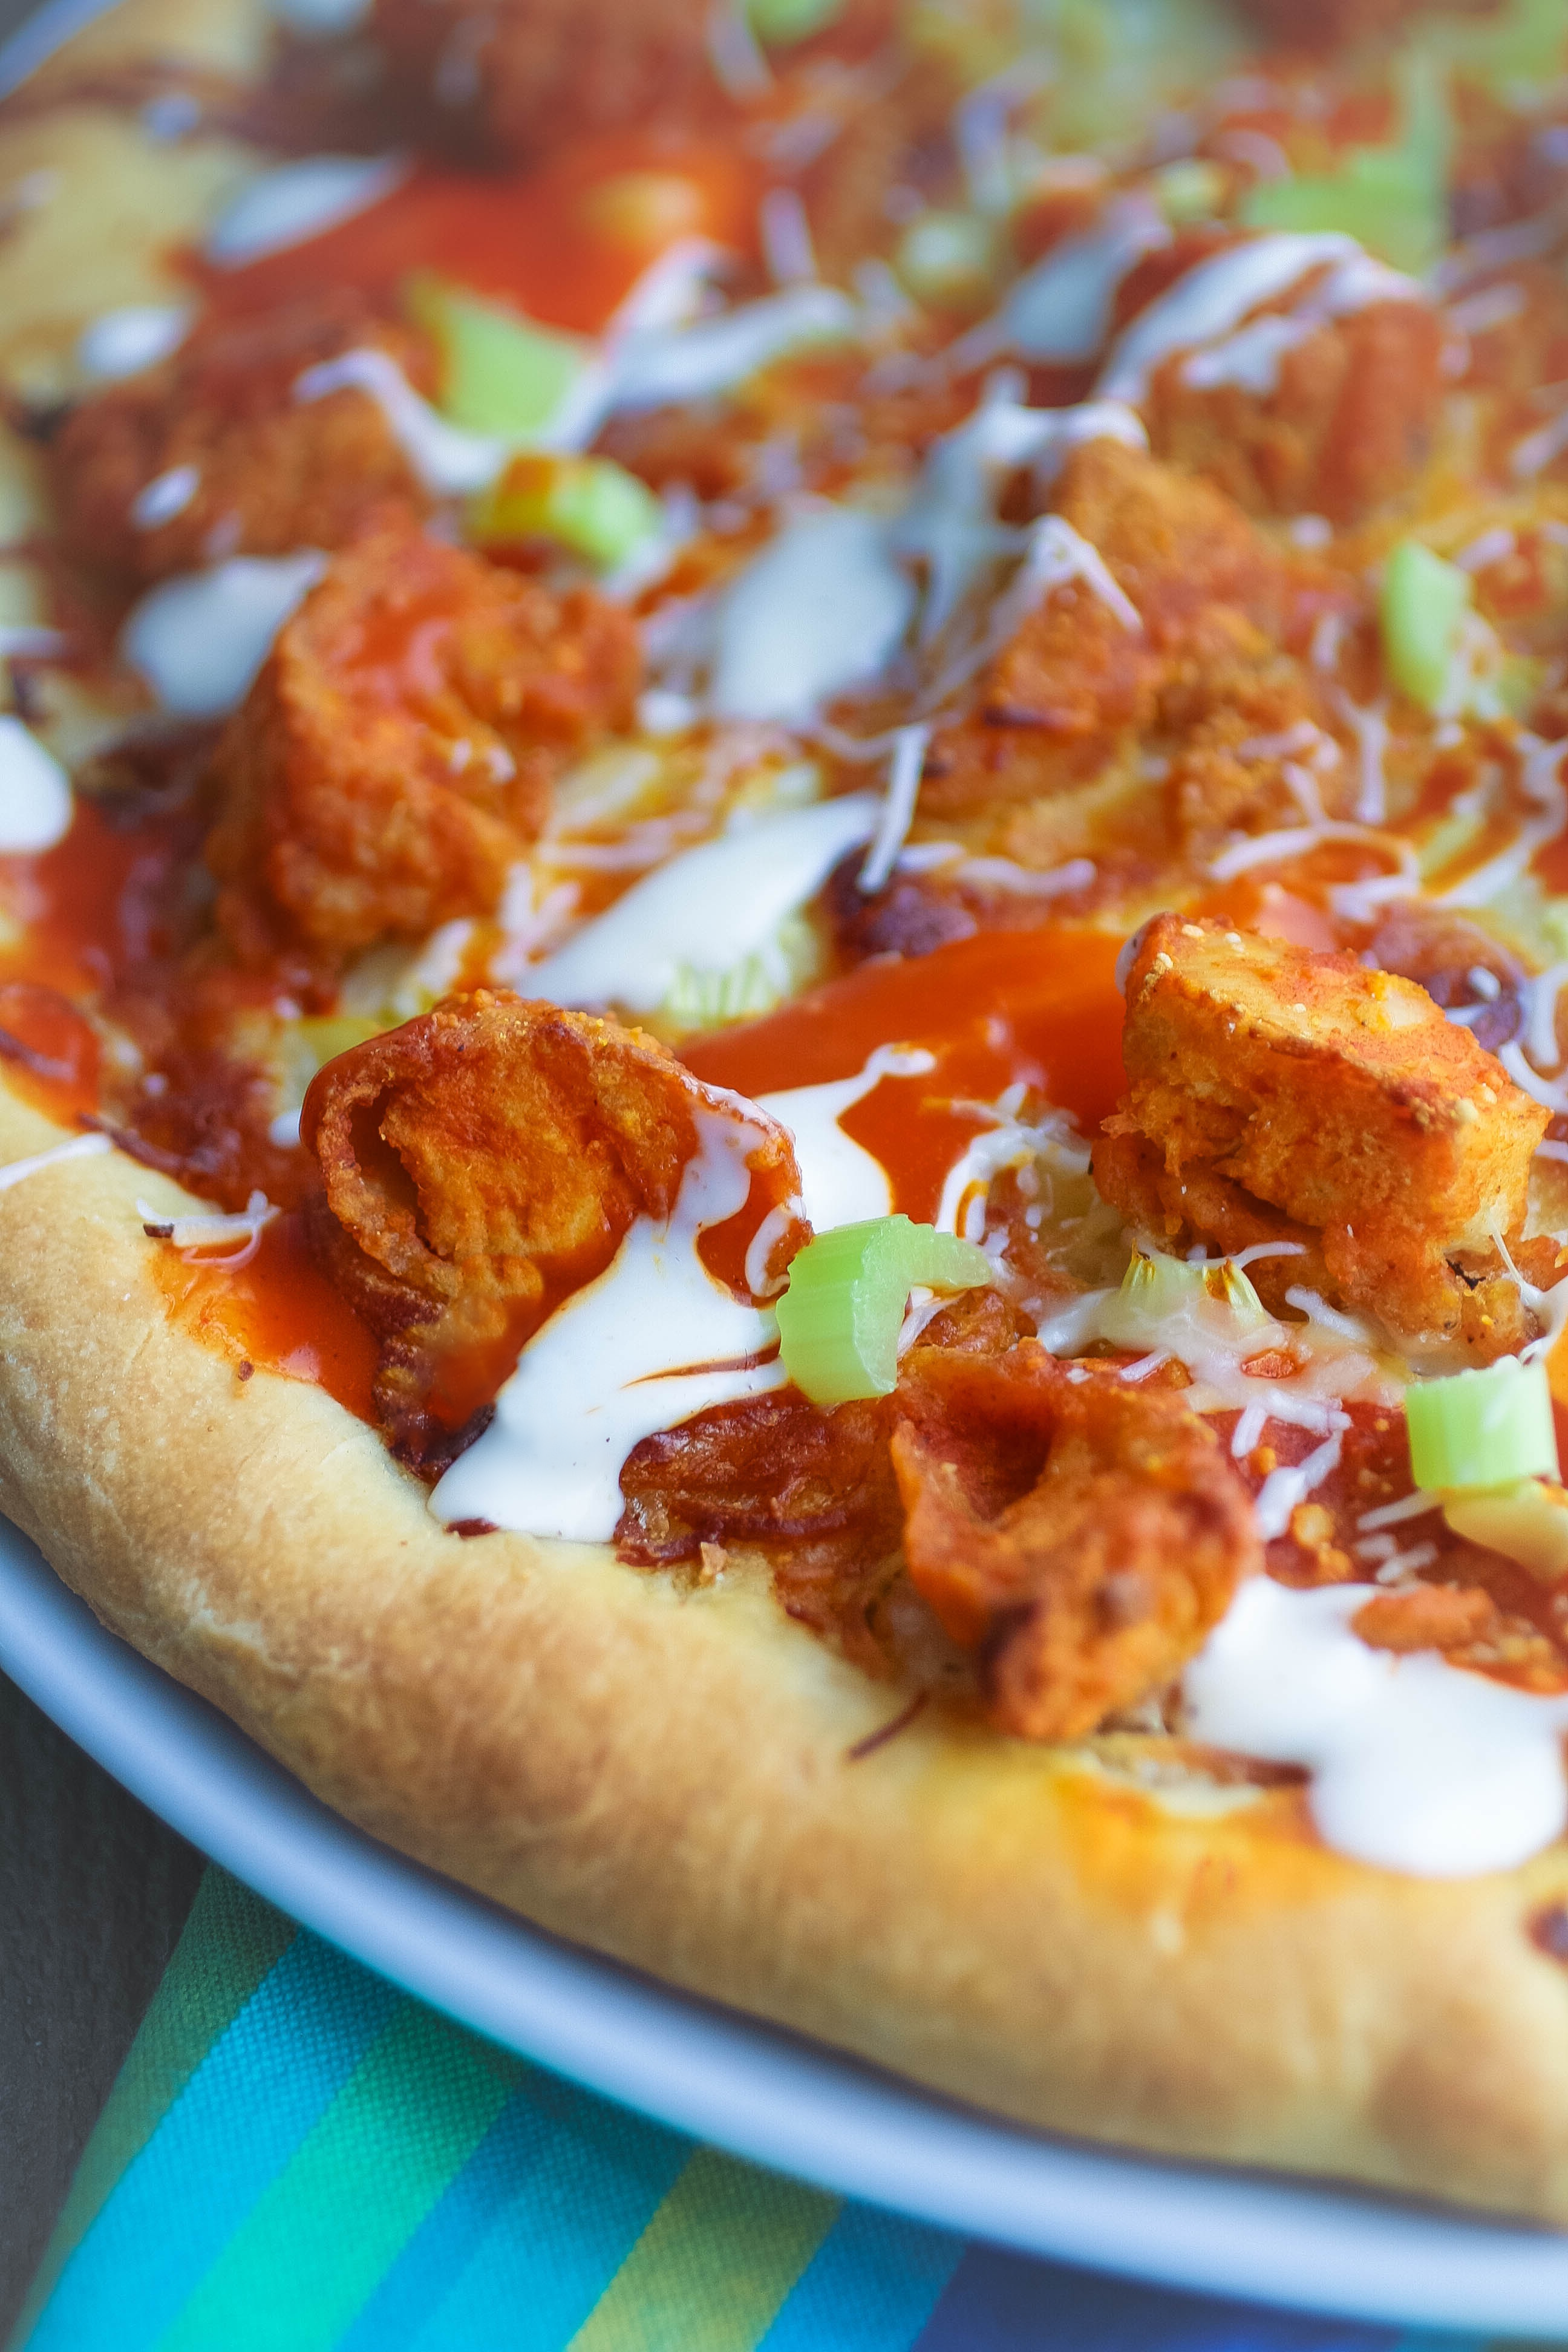 Buffalo Chicken Pizza is the best of both worlds: wings and pizza! You'll love this fun spin on pizza!